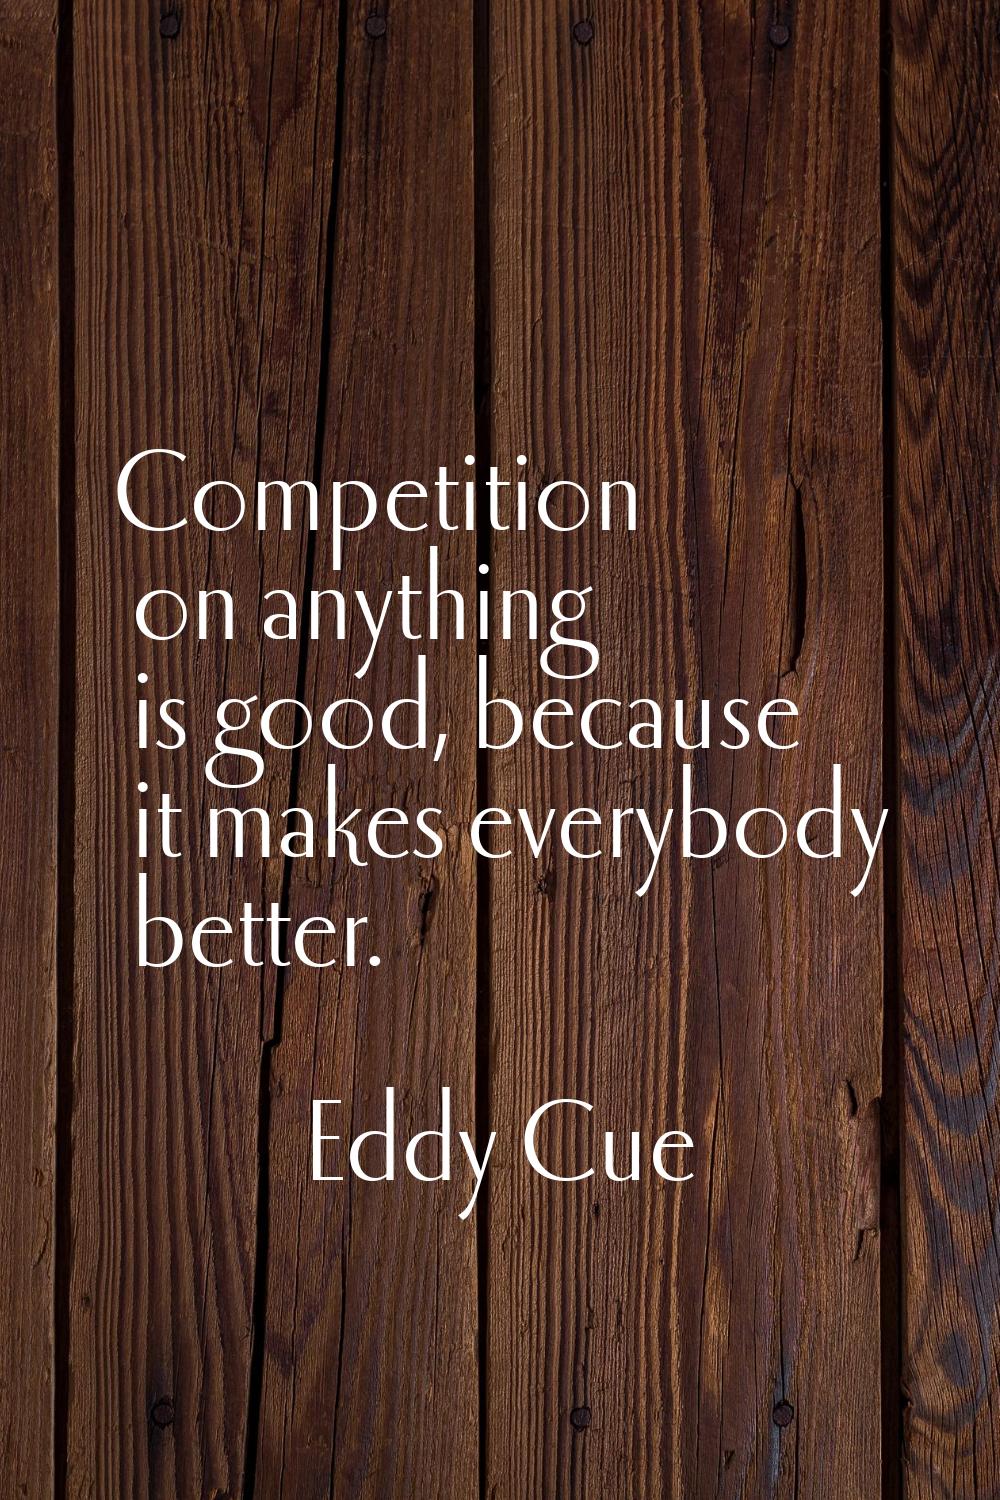 Competition on anything is good, because it makes everybody better.